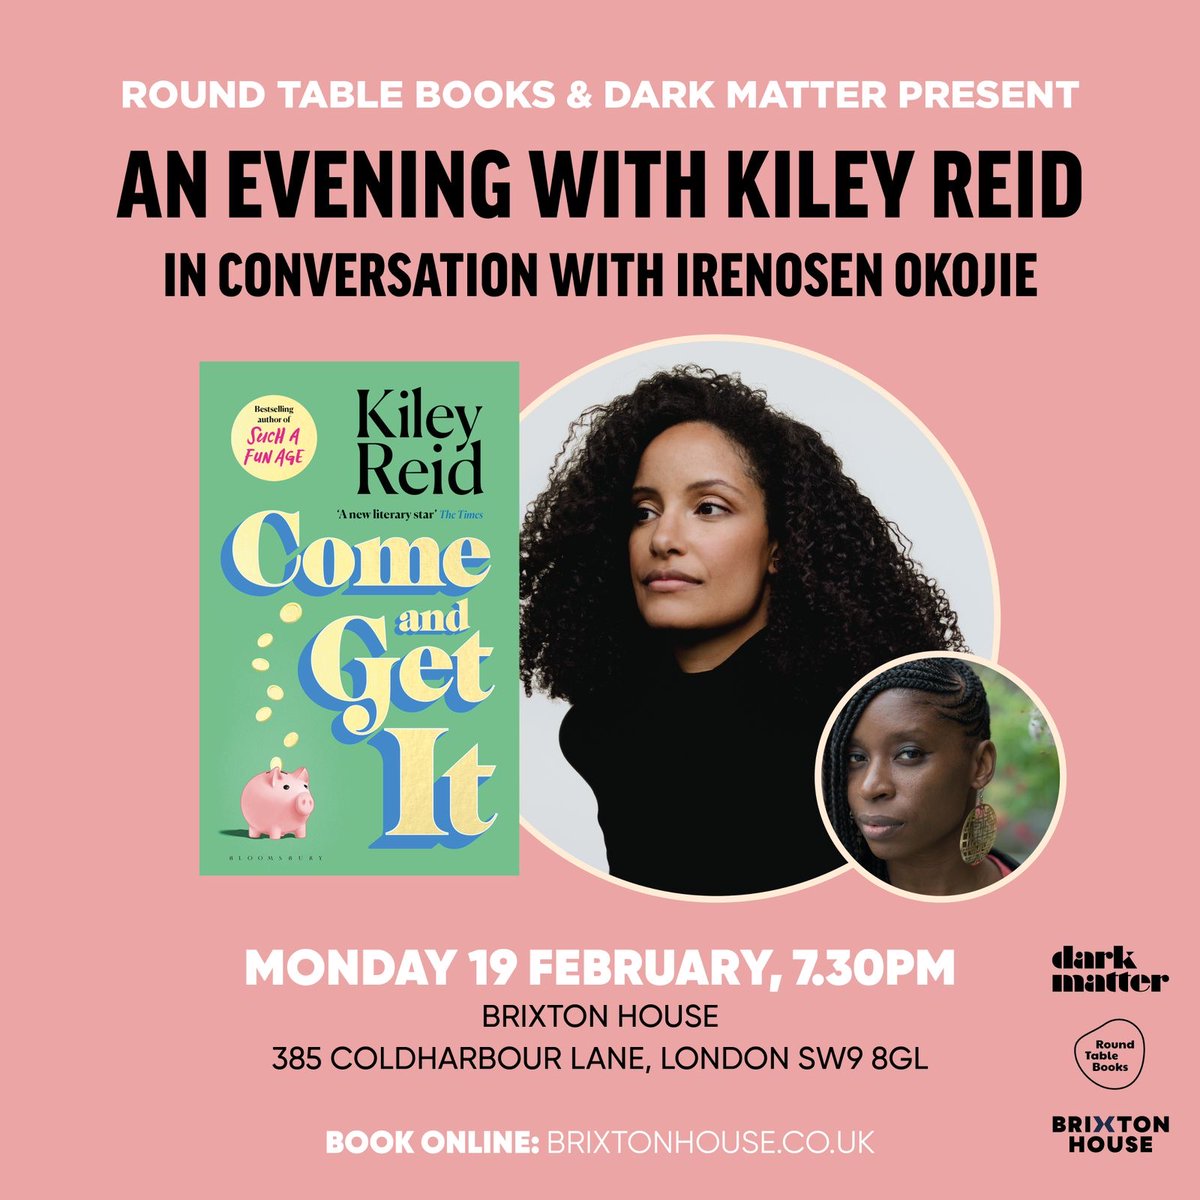 We can't get enough of #ComeandGetIt, @kileyreid's incredible novel, out January 30th 😍 Want to hear more? Join Kiley and the fabulous @IrenosenOkojie on February 19th, chatting about desire, consumption and bad behaviour... Tickets available here: bit.ly/48B6igx